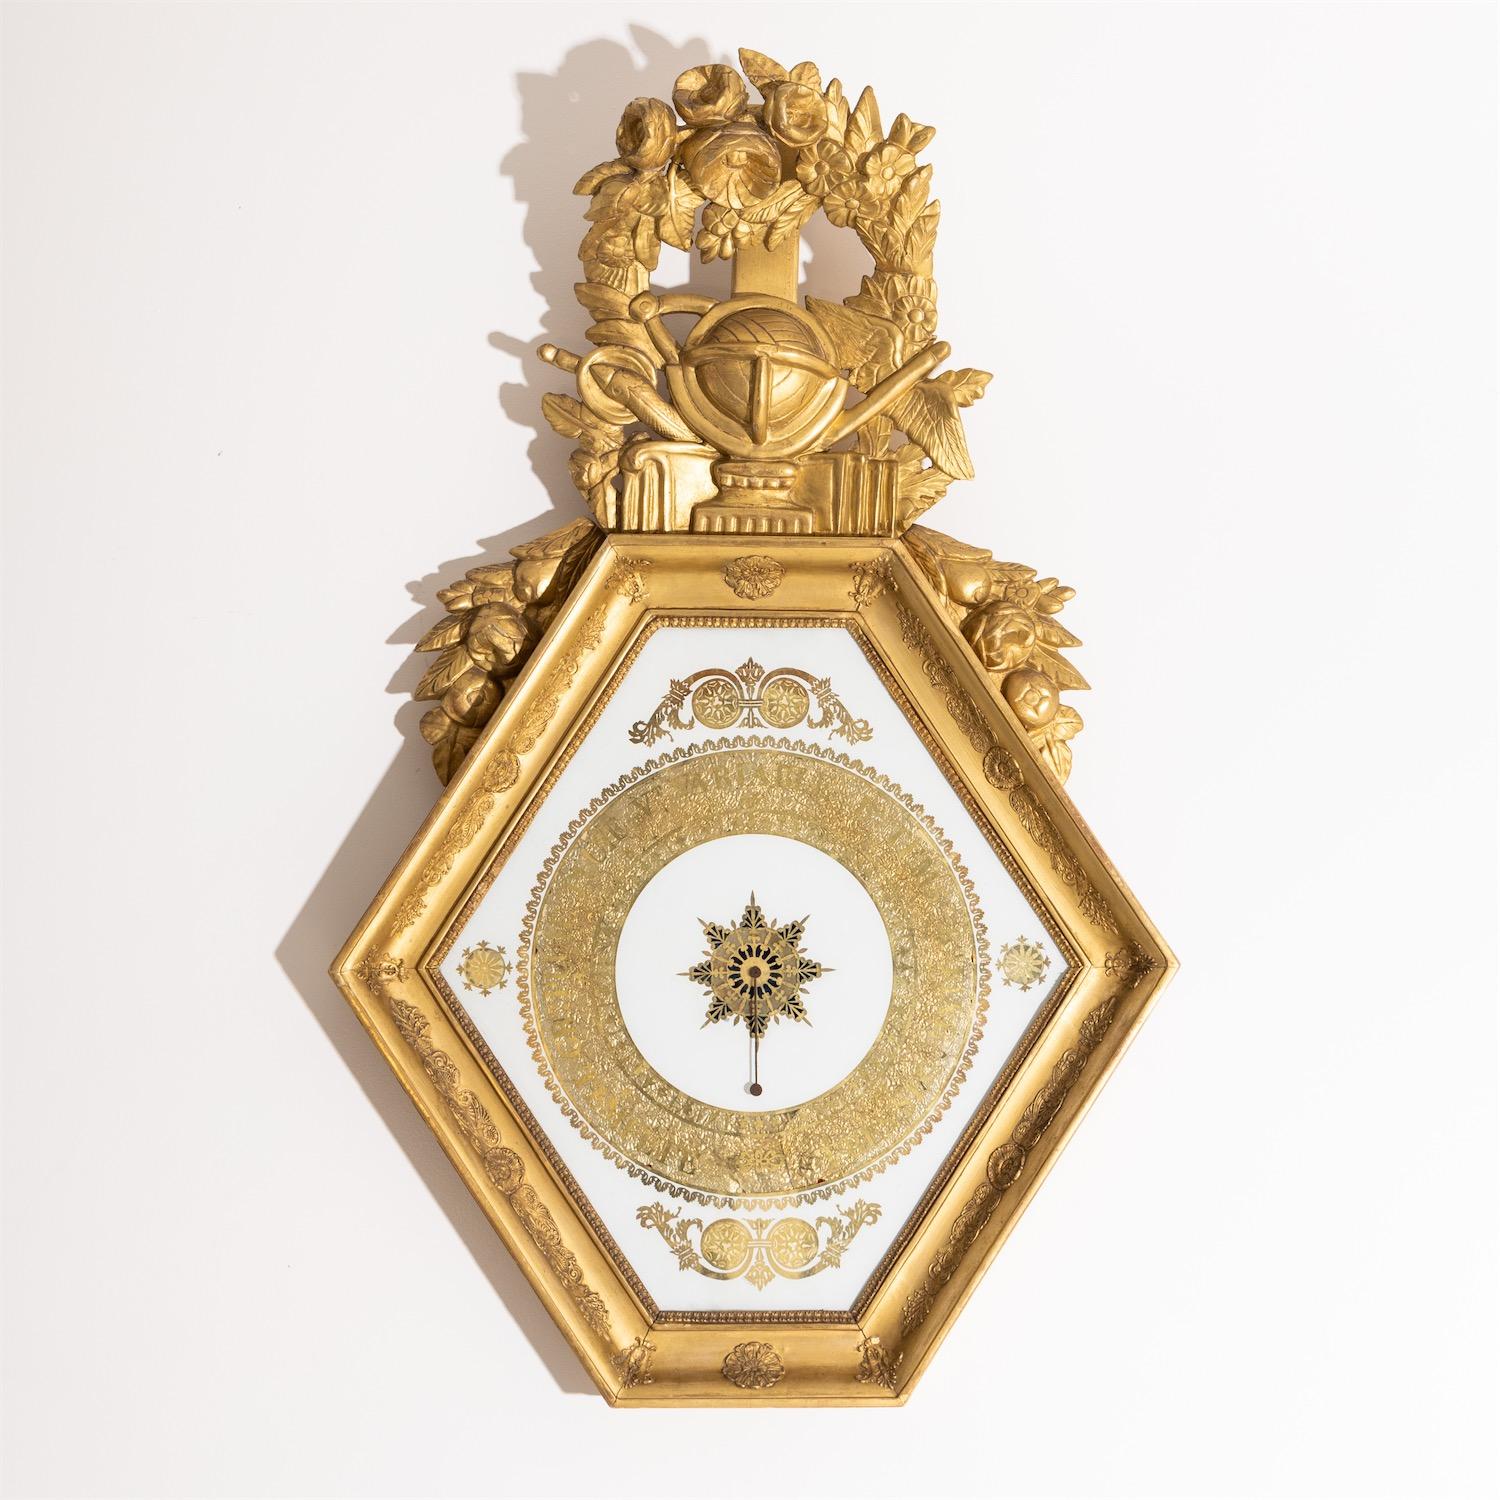 Hexagonal barometer in gold-patinated stucco frame with carved top in the form of flower festoons and central globe motif as an allegory on geography. The dial made of glass with églomisé painting.